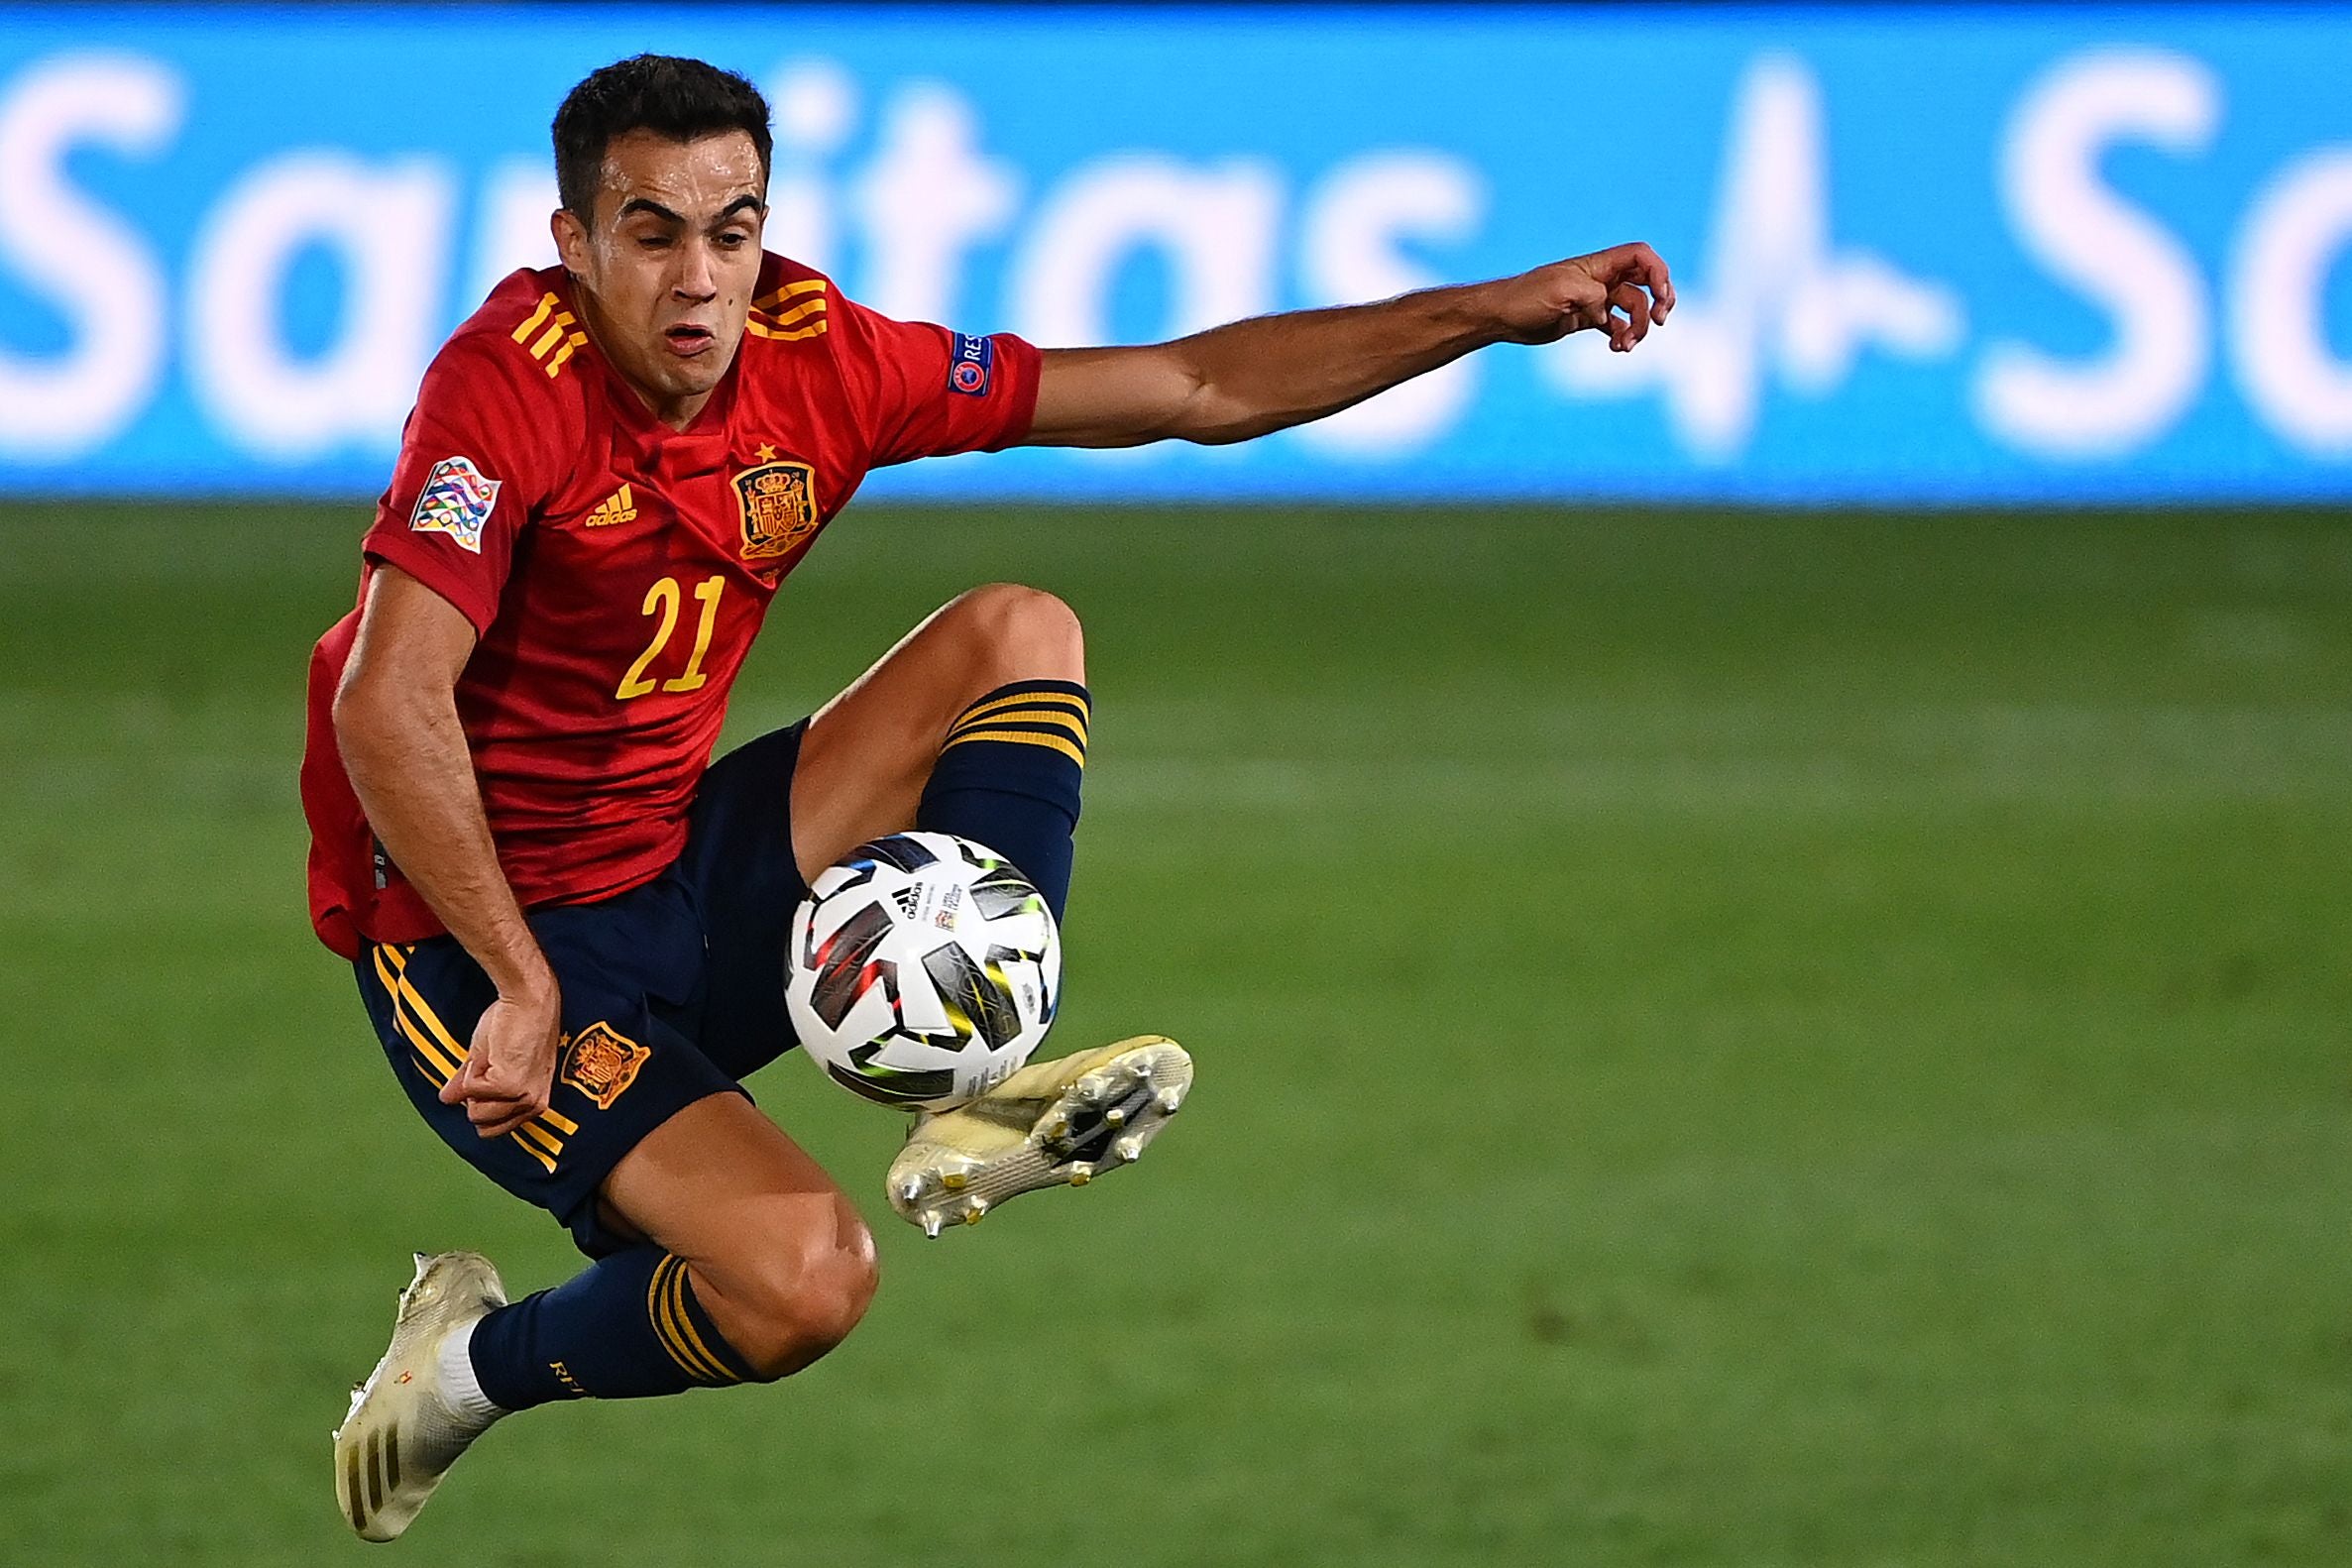 Sergio Reguilon, full-back for Spain and Real Madrid